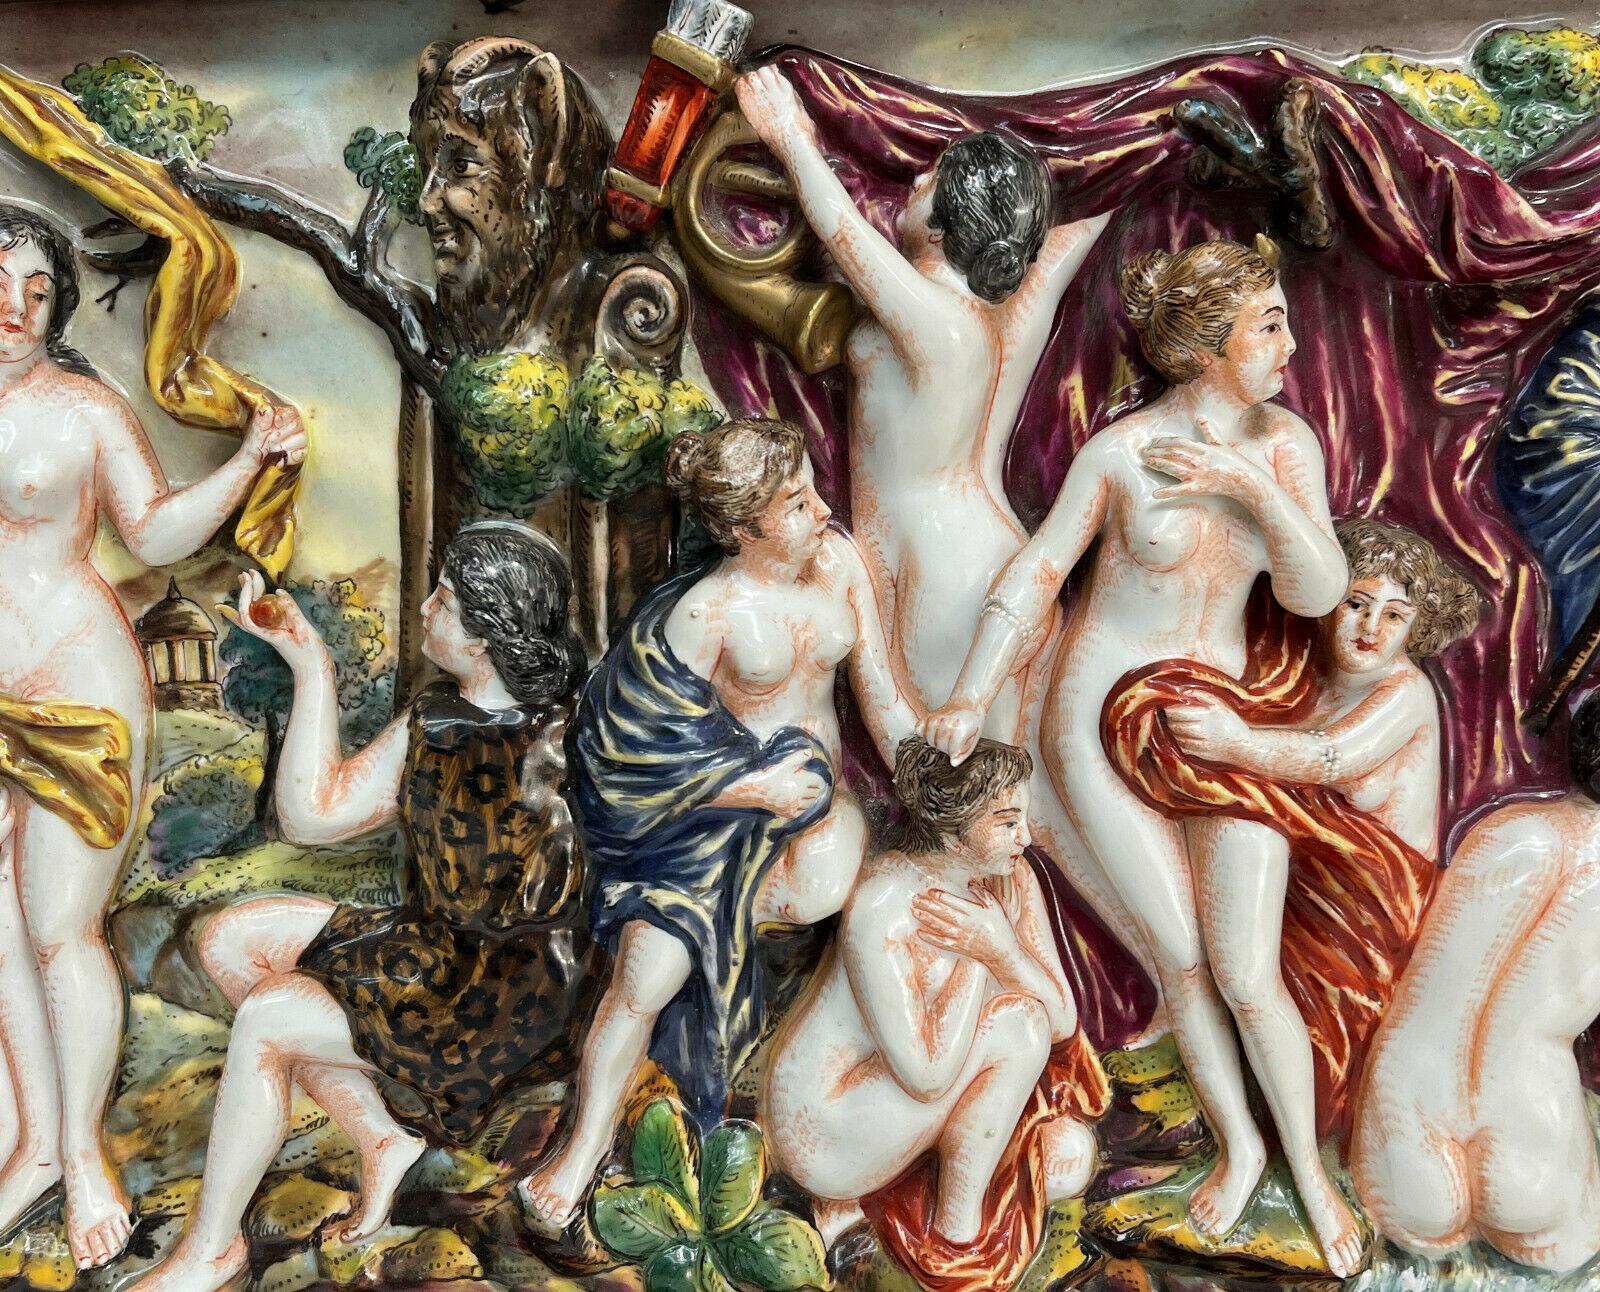 20th Century Capodimonte Porcelain High Relief Plaque after Peter Paul Rubens, Diana & Nymphs